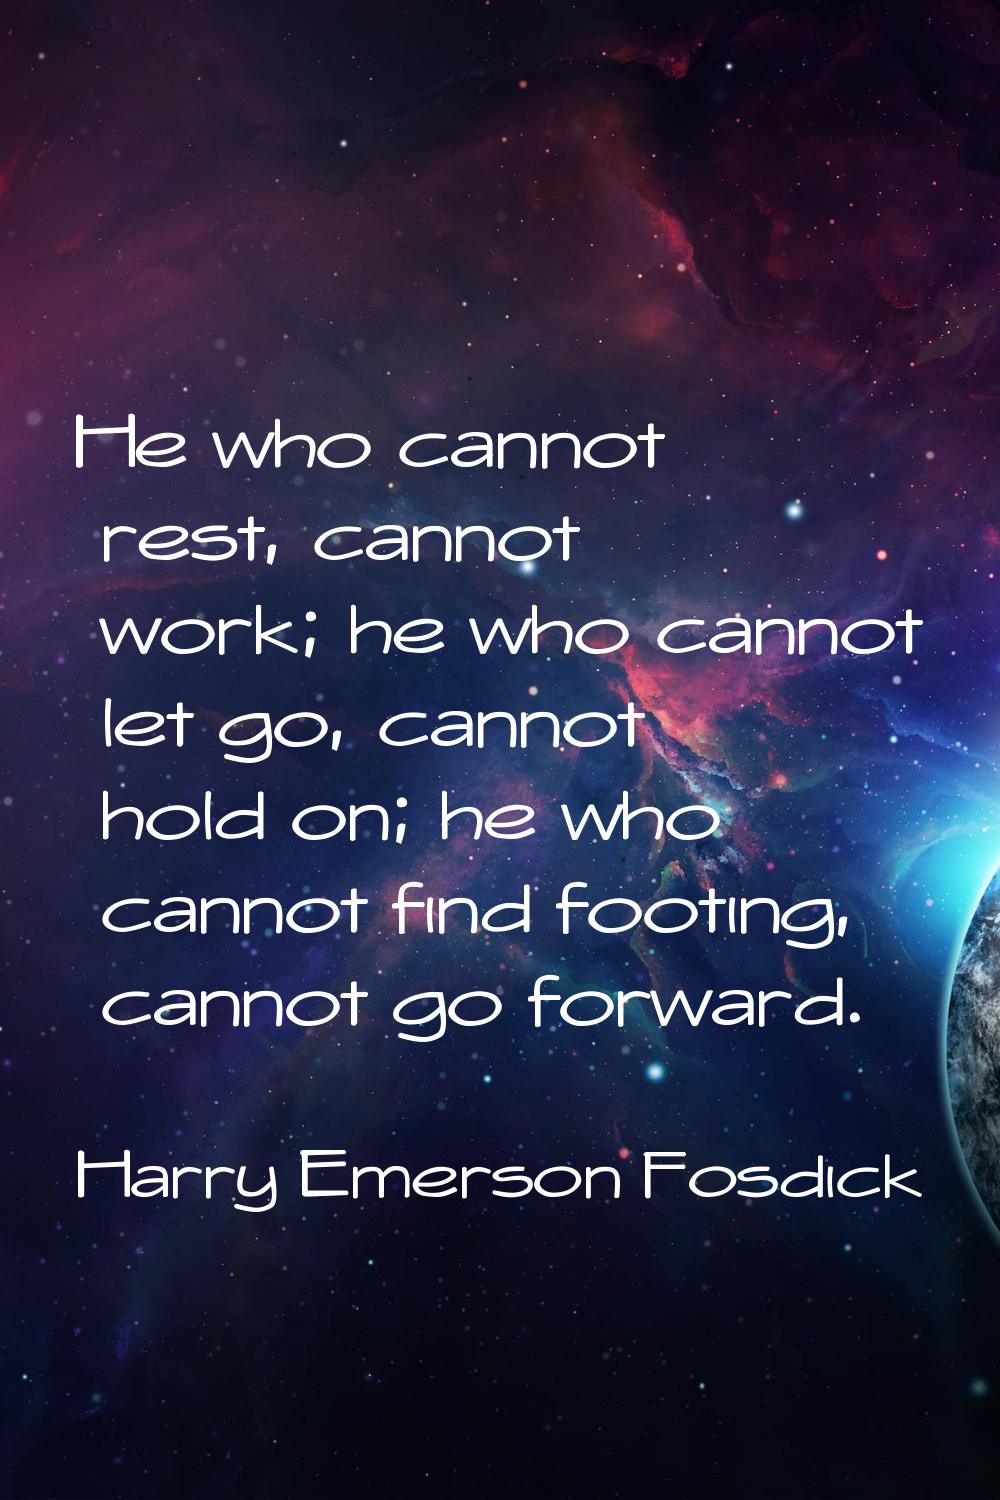 He who cannot rest, cannot work; he who cannot let go, cannot hold on; he who cannot find footing, 